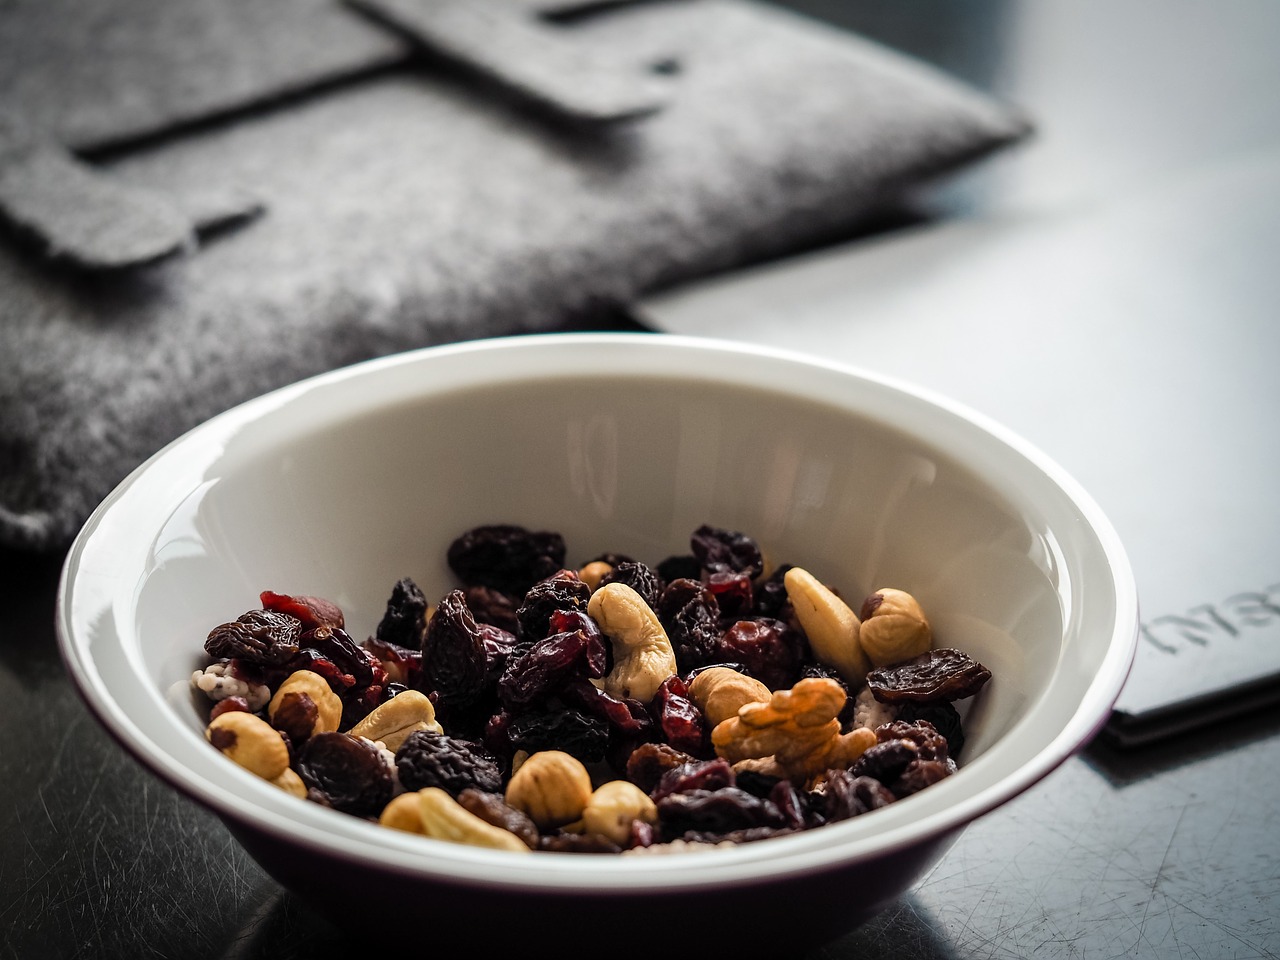 healthy snack of raisins and nuts for before and after a run